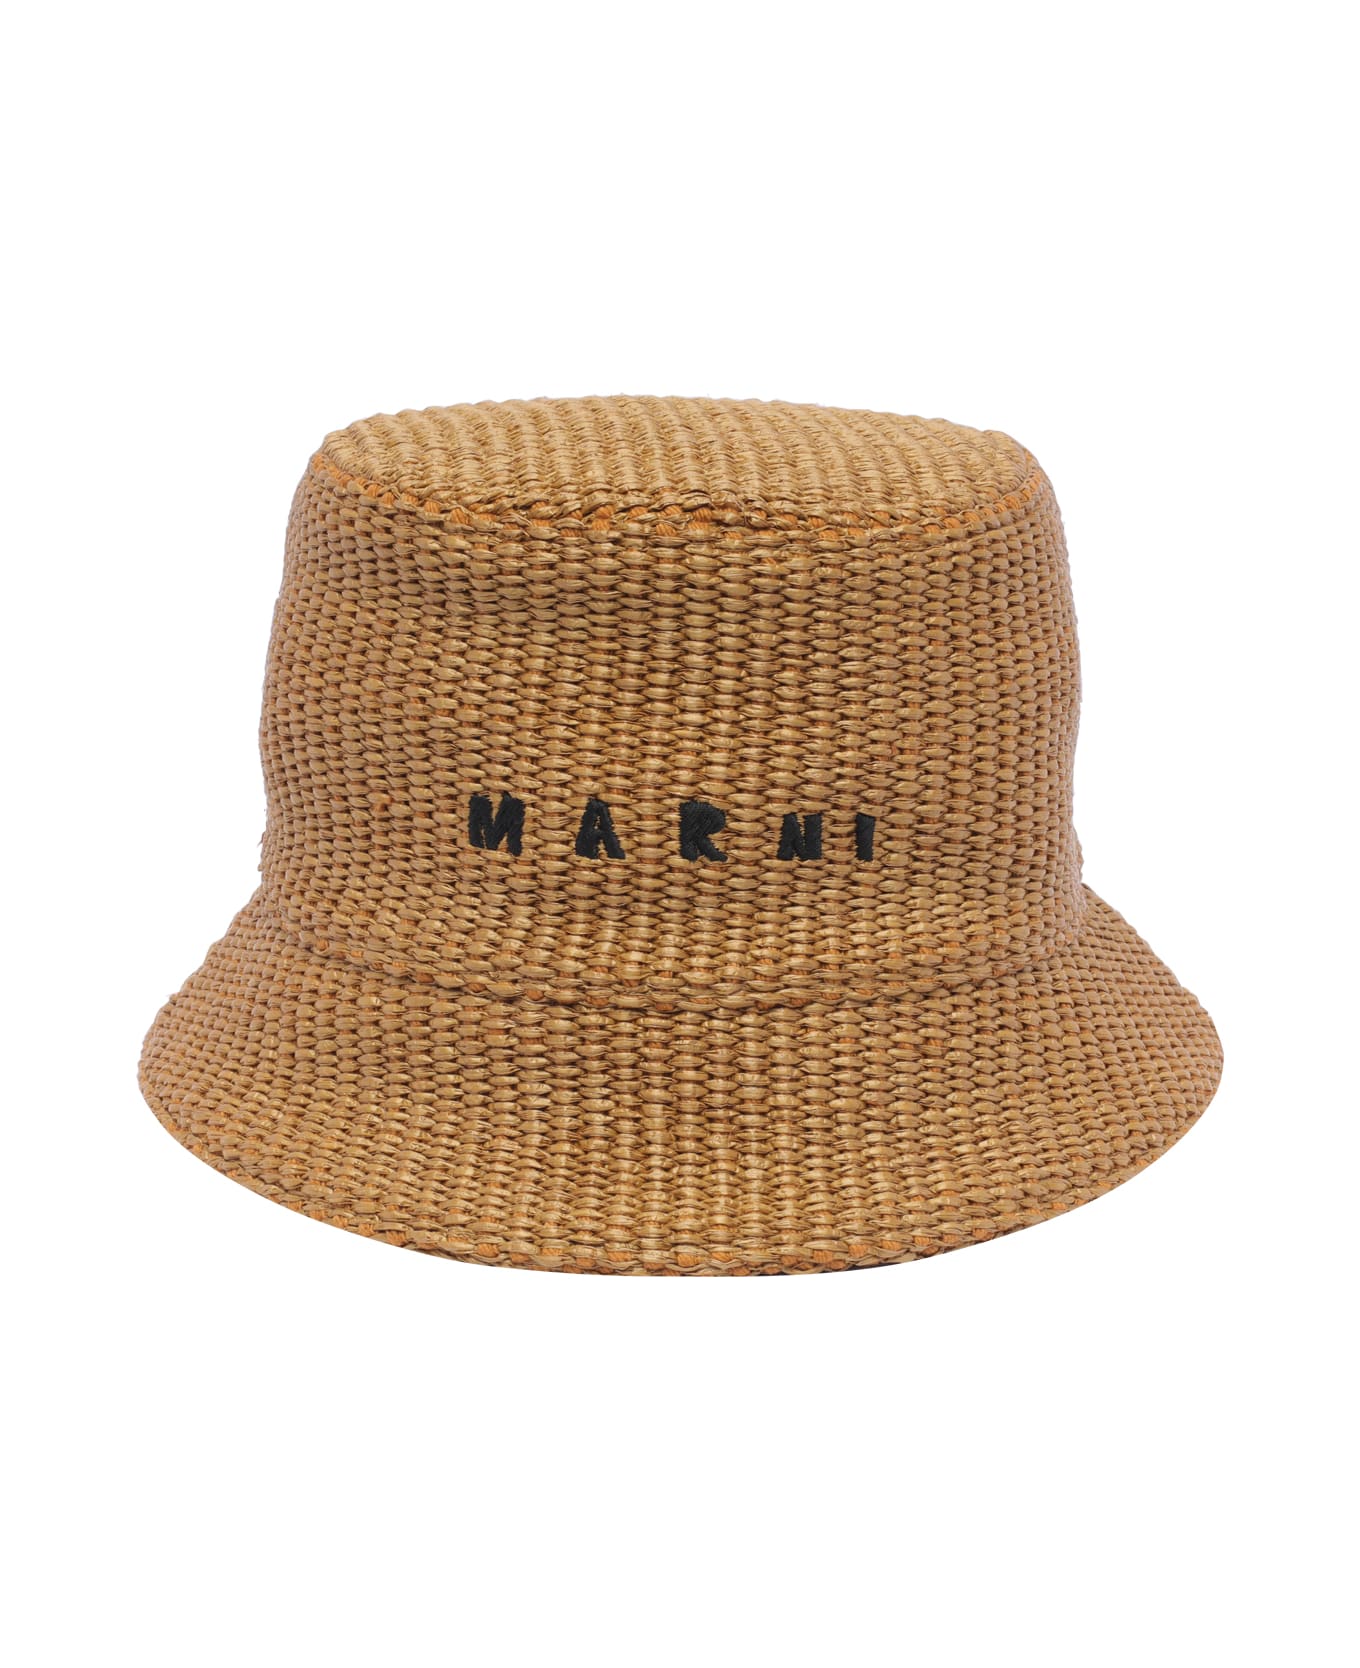 Marni Bucket Hat Rafia Effect With Embroidered Logo - Brown